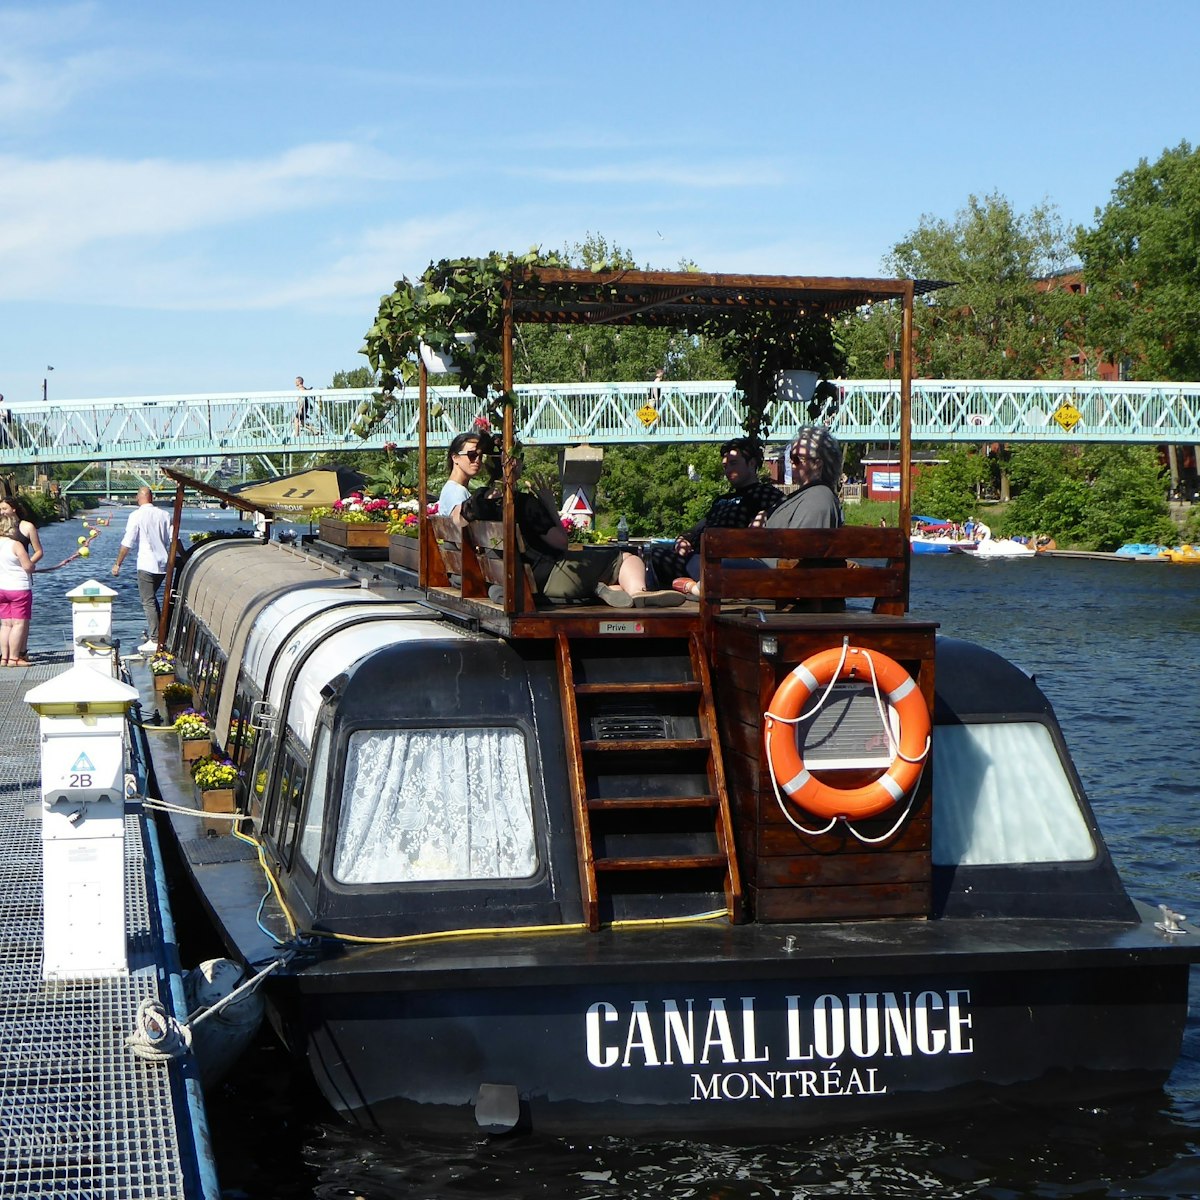 The Canal Lounge is a floating cocktail bar built into a renovated boat parked on the Lachine Canal.